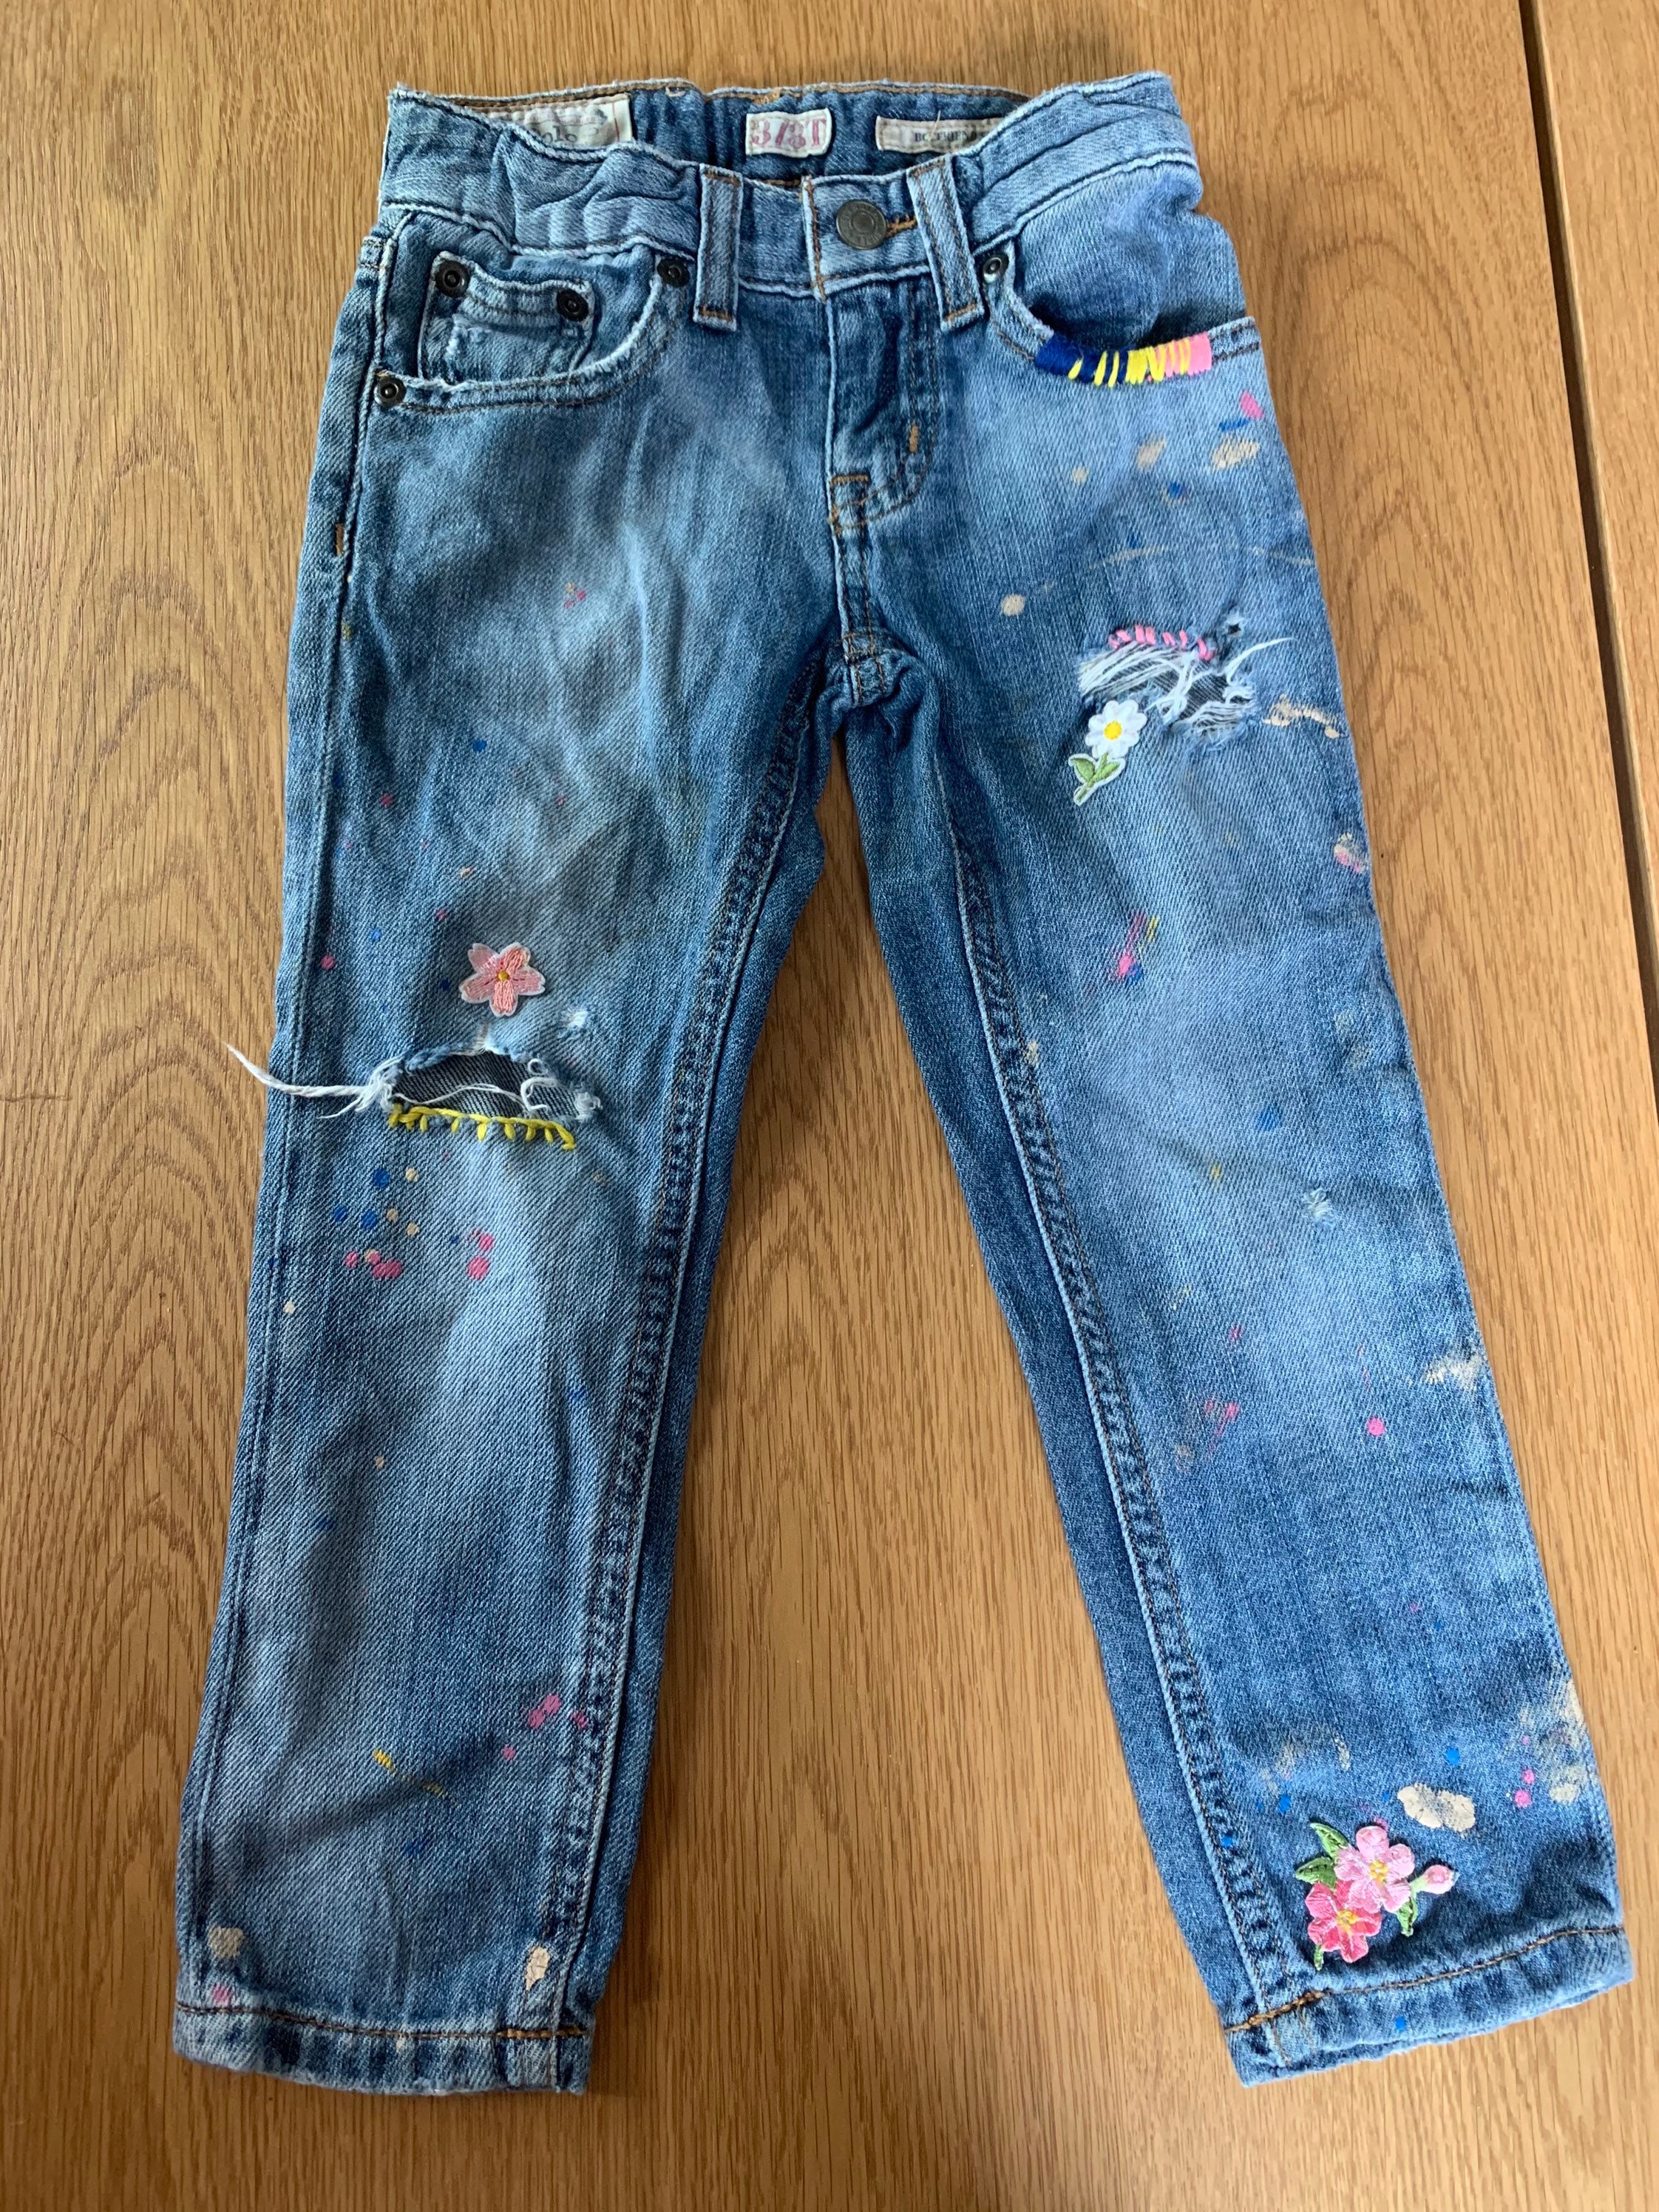 Polo Ralph Lauren Girls Toddler Girl Distressed Jeans Ripped Destroyed  Upcycled 3t Girls Denim Rips Paint Splatter Flower Embroidery Boho -   Canada